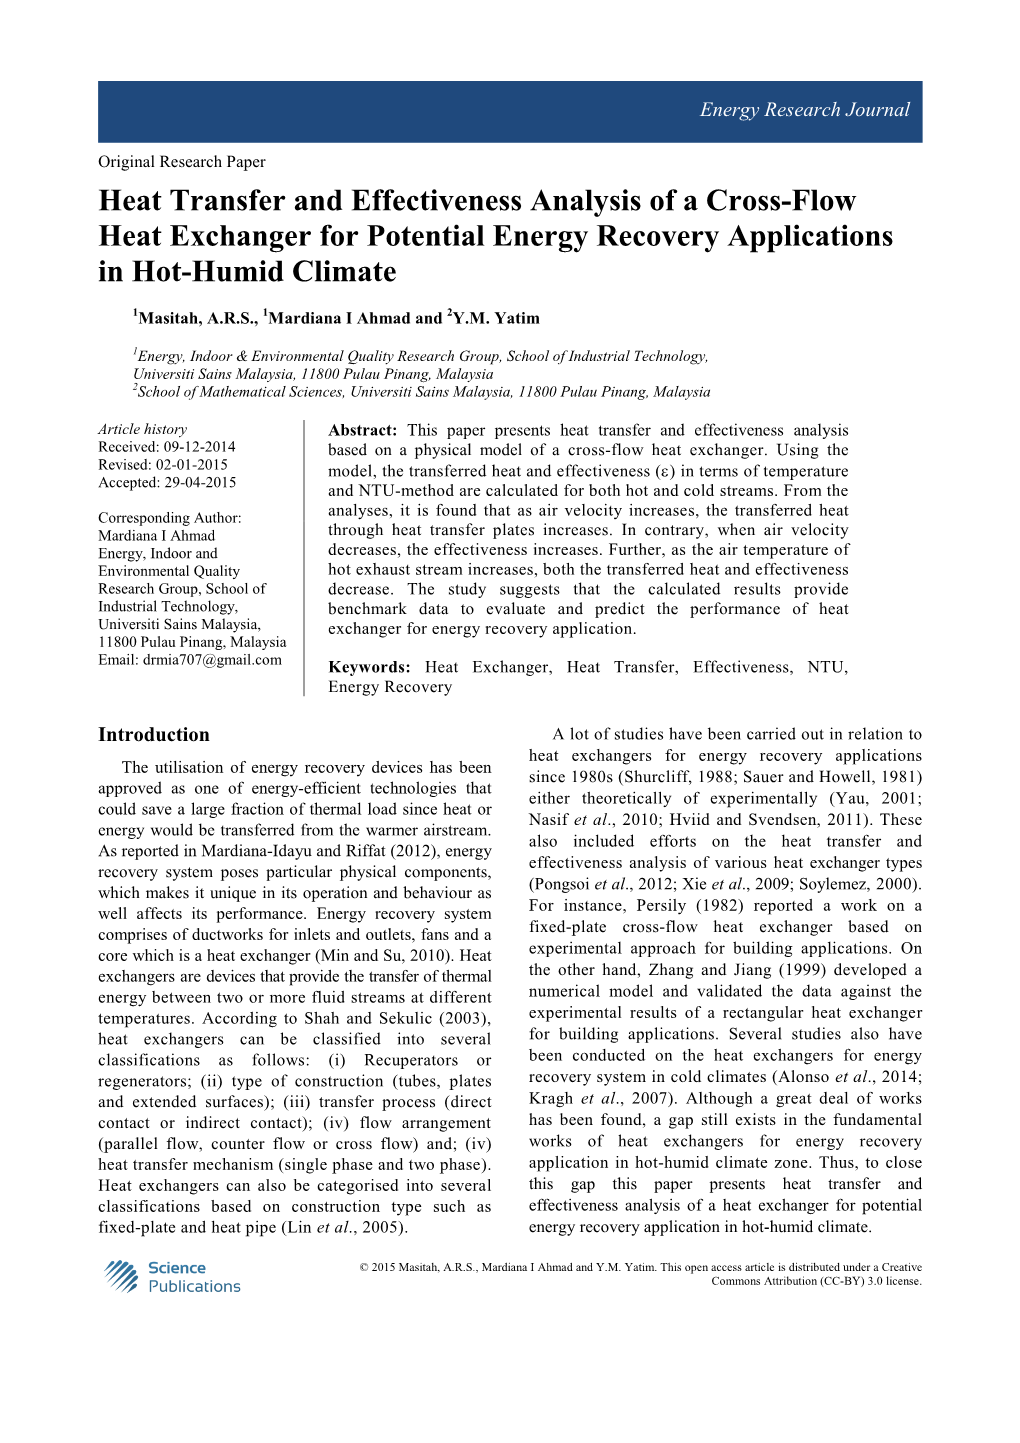 Heat Transfer and Effectiveness Analysis of a Cross-Flow Heat Exchanger for Potential Energy Recovery Applications in Hot-Humid Climate